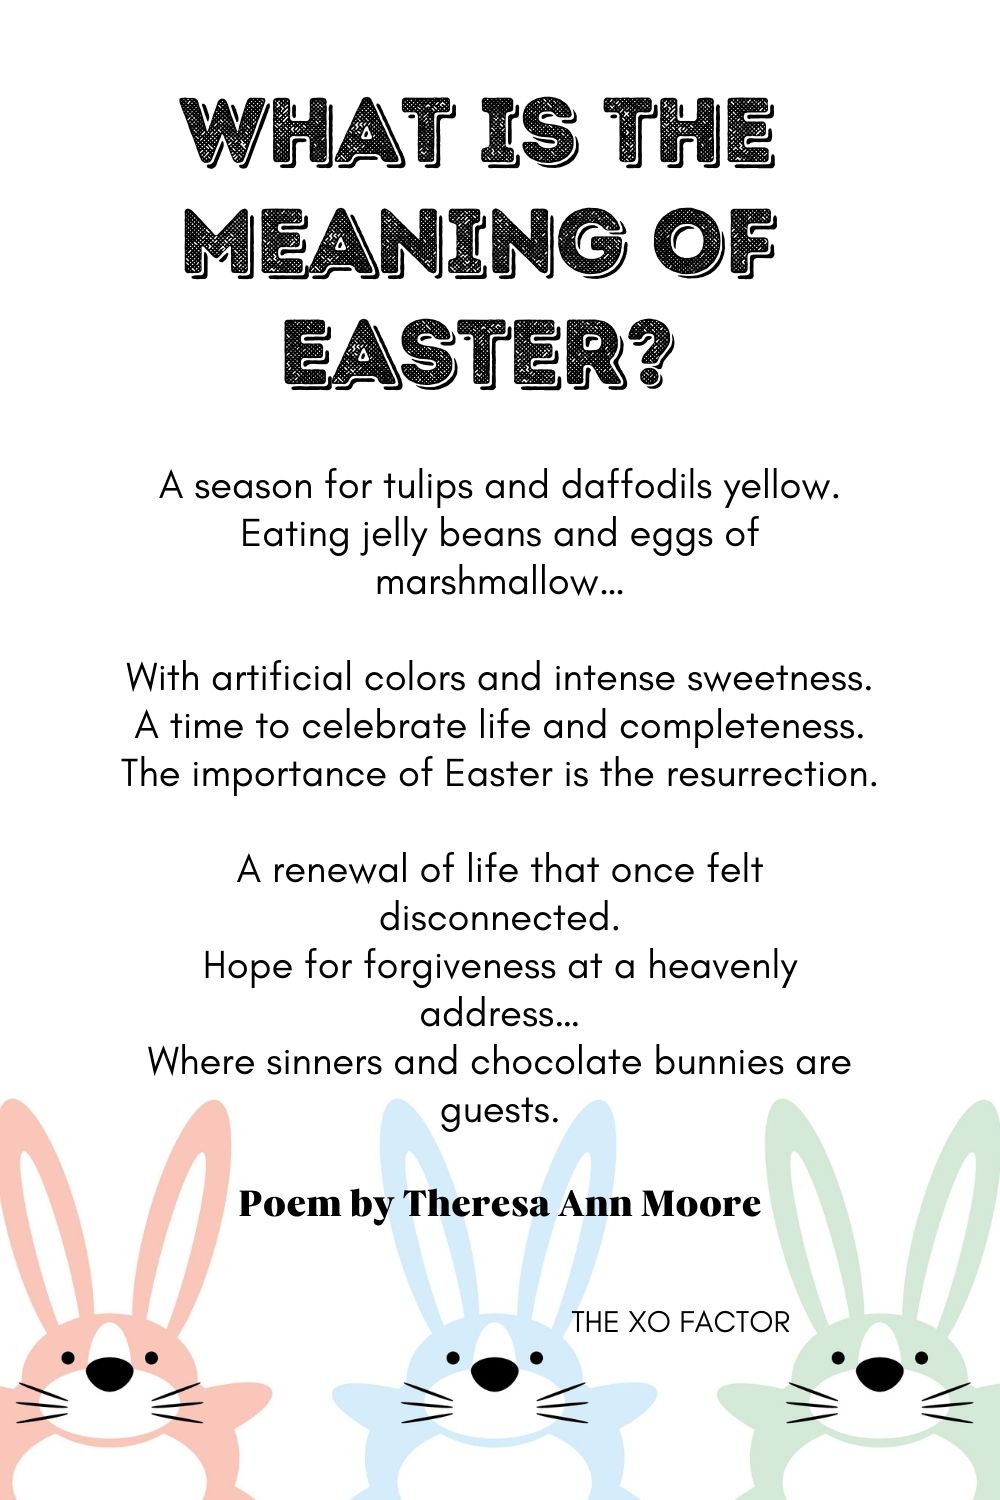 What Is The Meaning Of Easter? Poem by Theresa Ann Moore